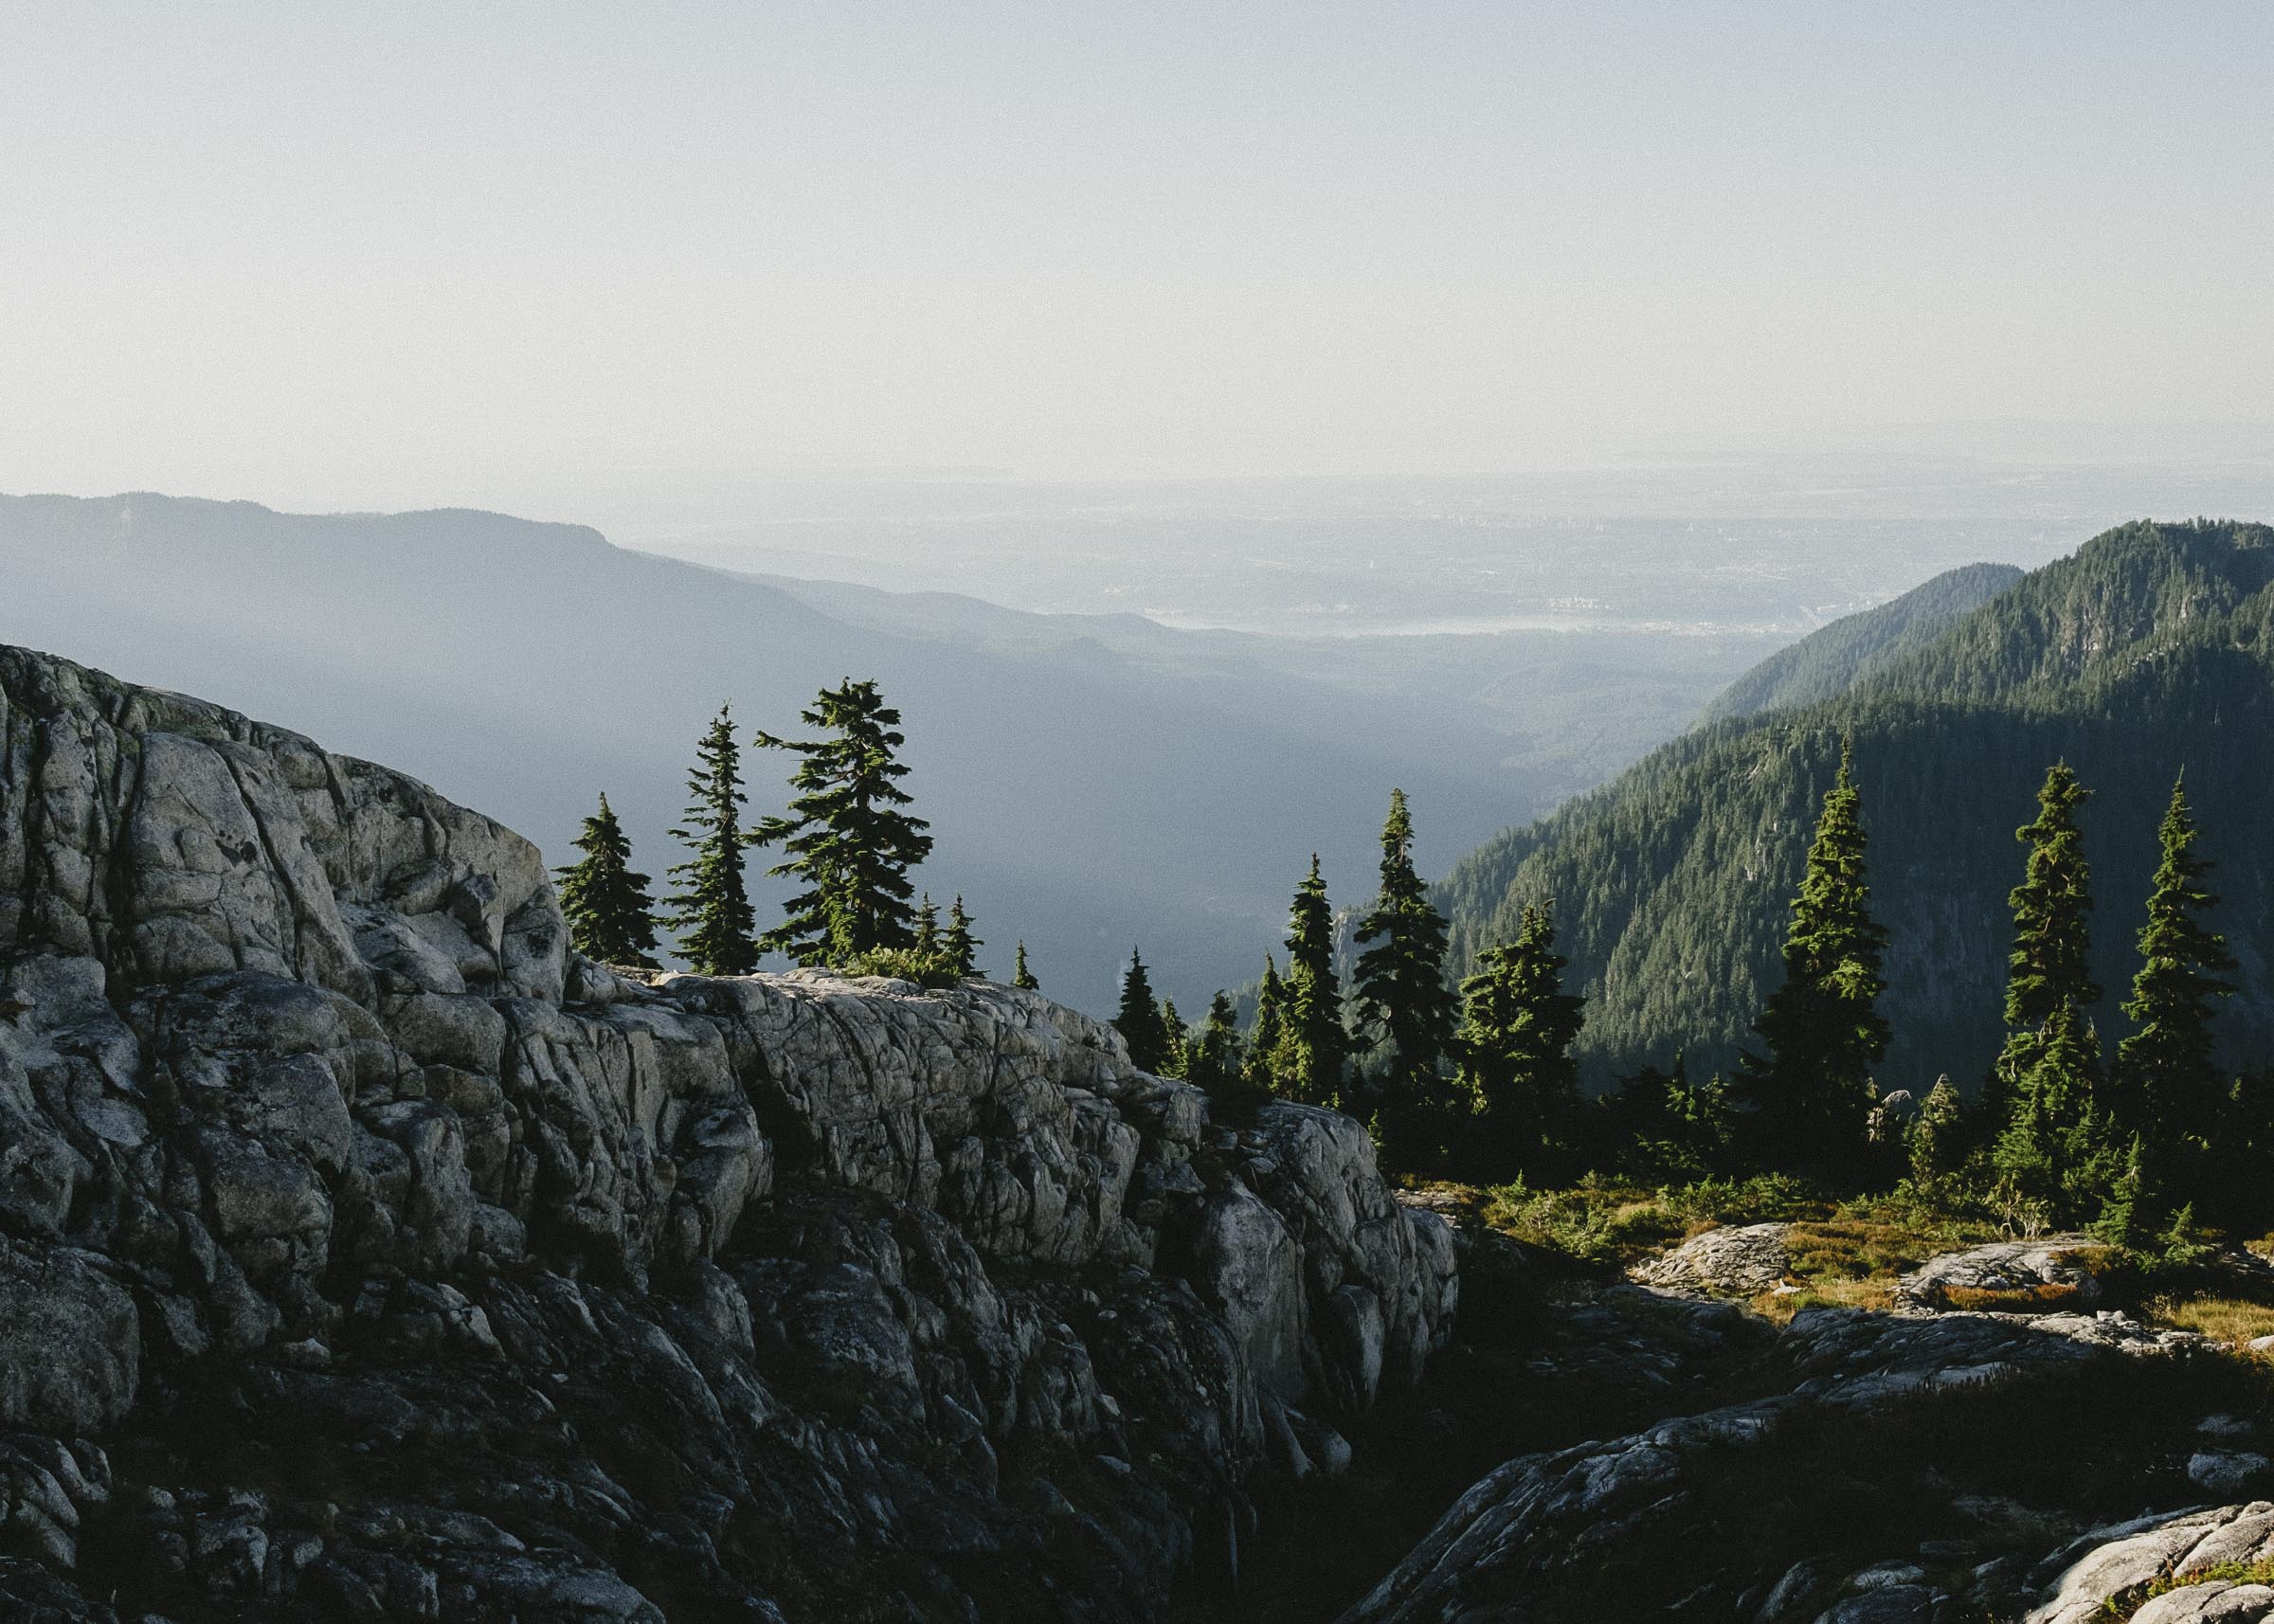 View from Coliseum Mountain on Vancouver's North Shore